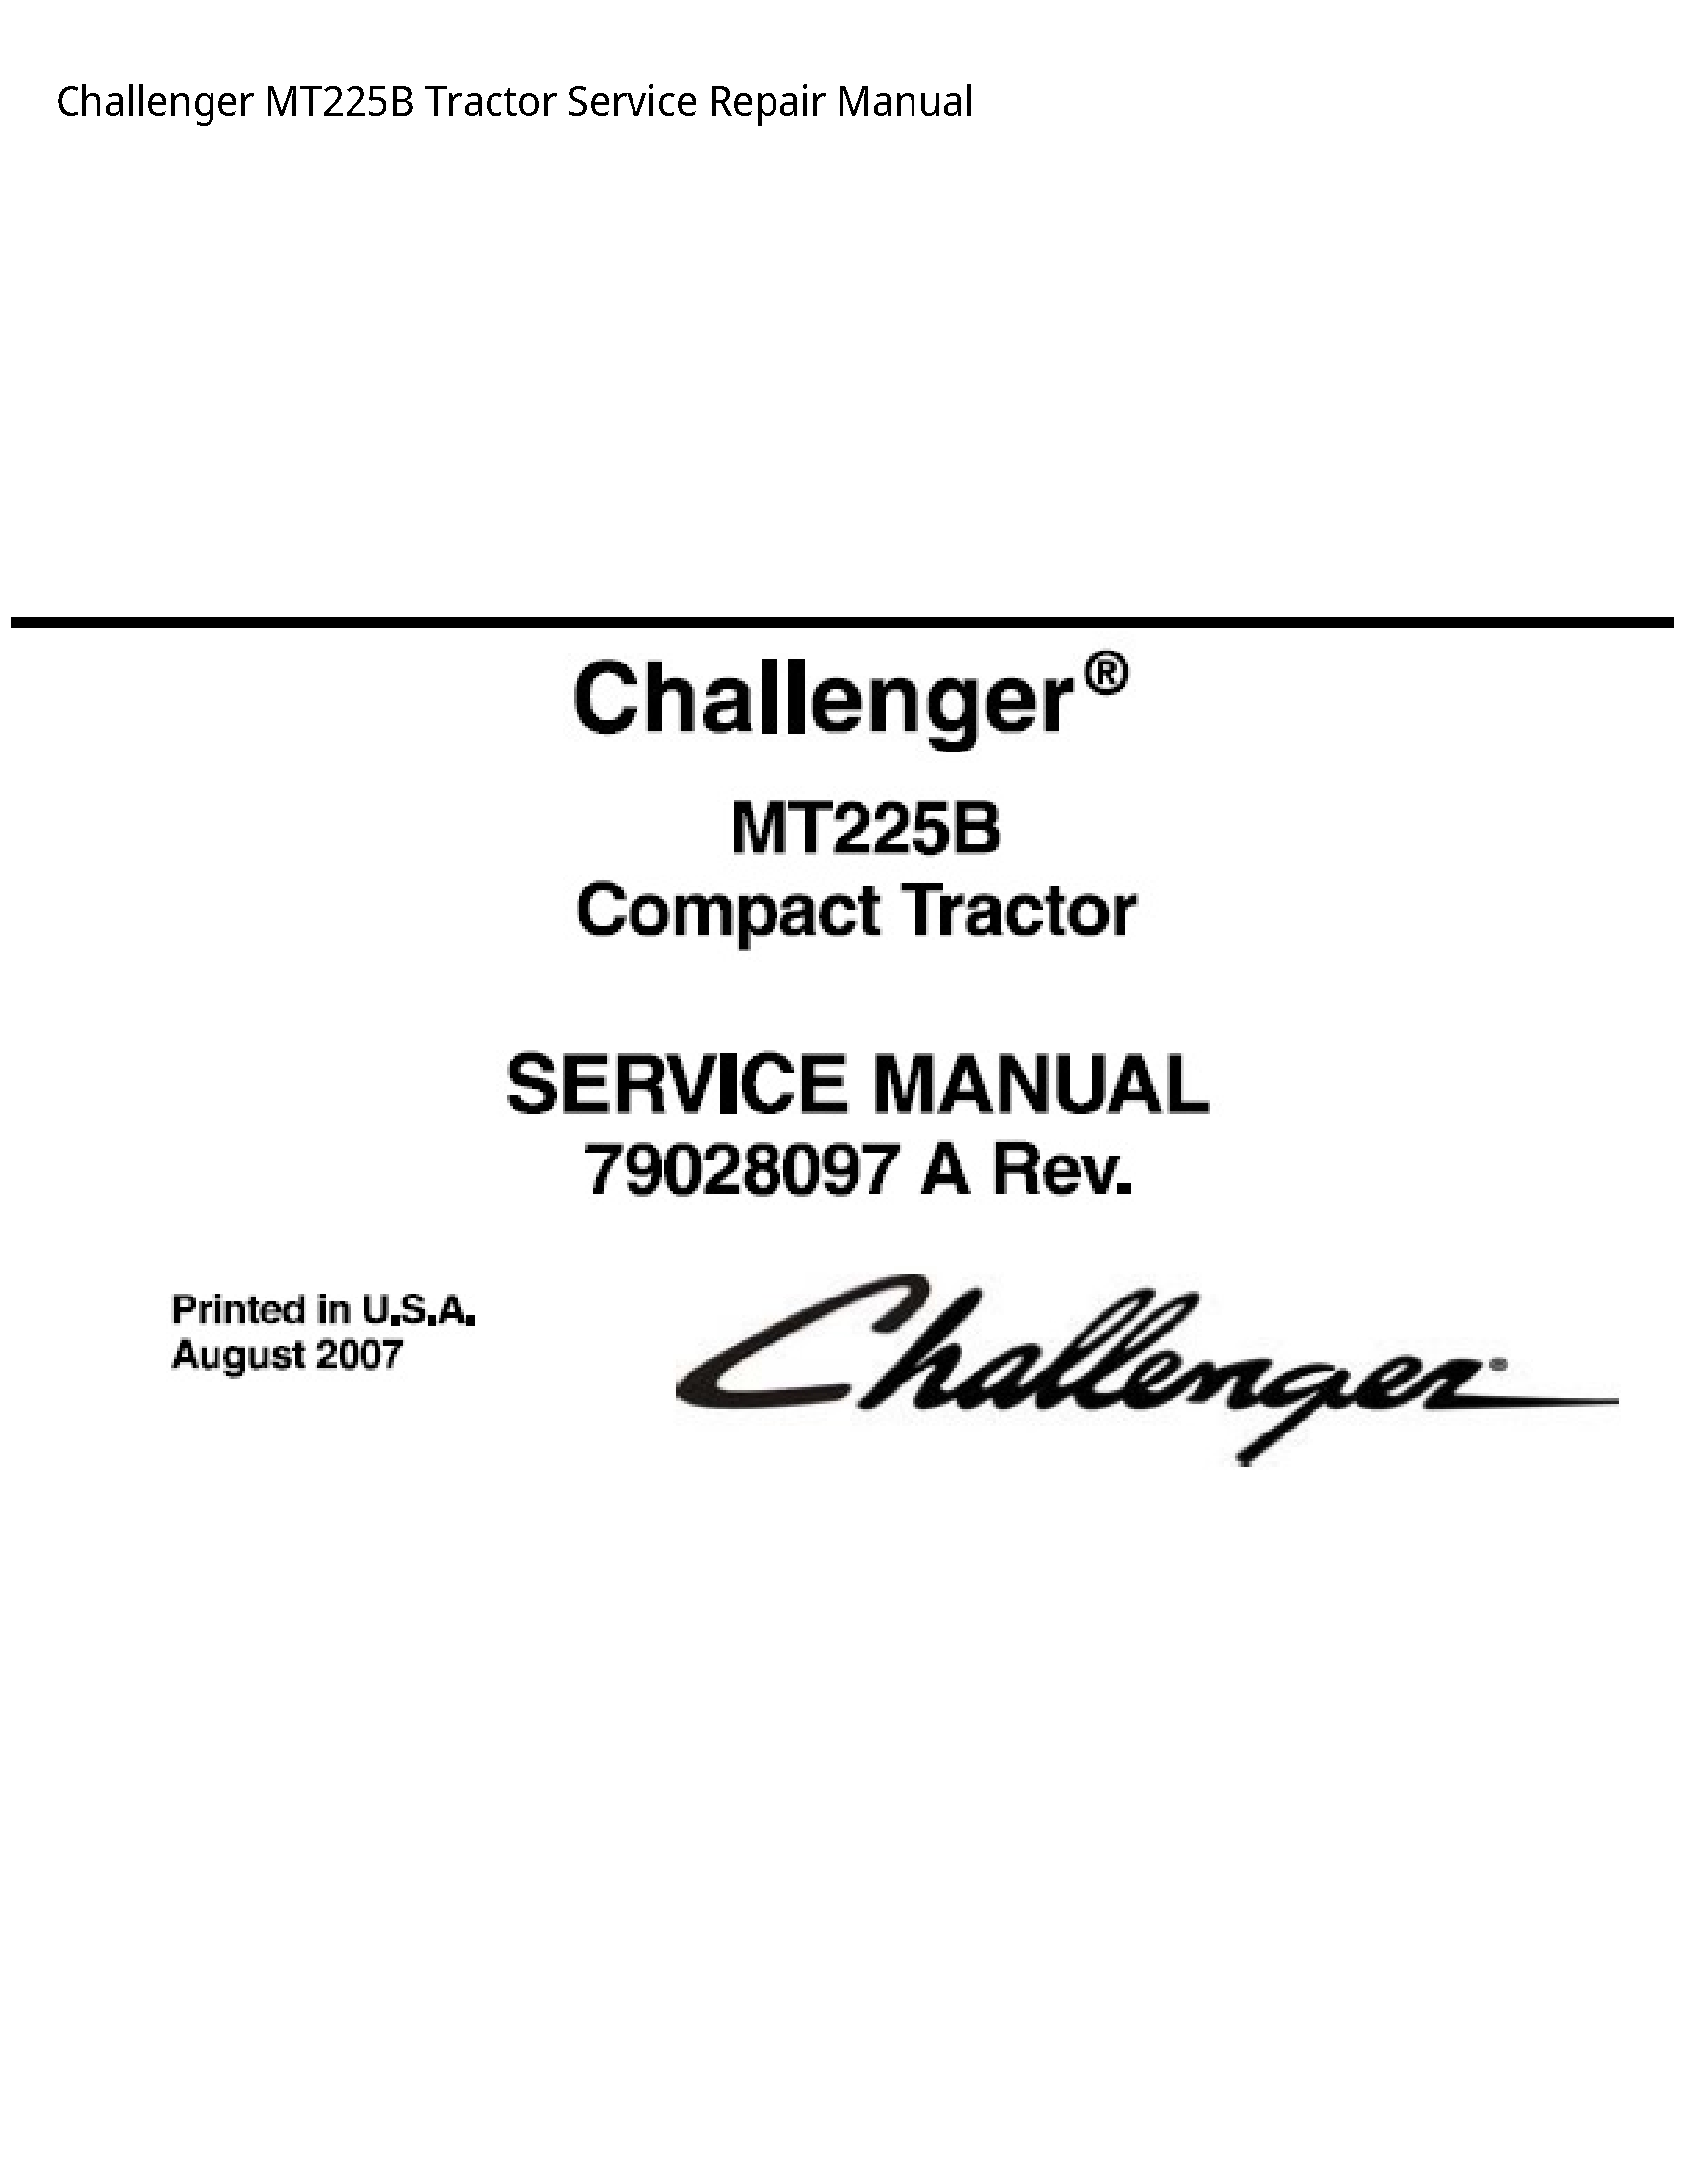 Challenger MT225B Tractor manual